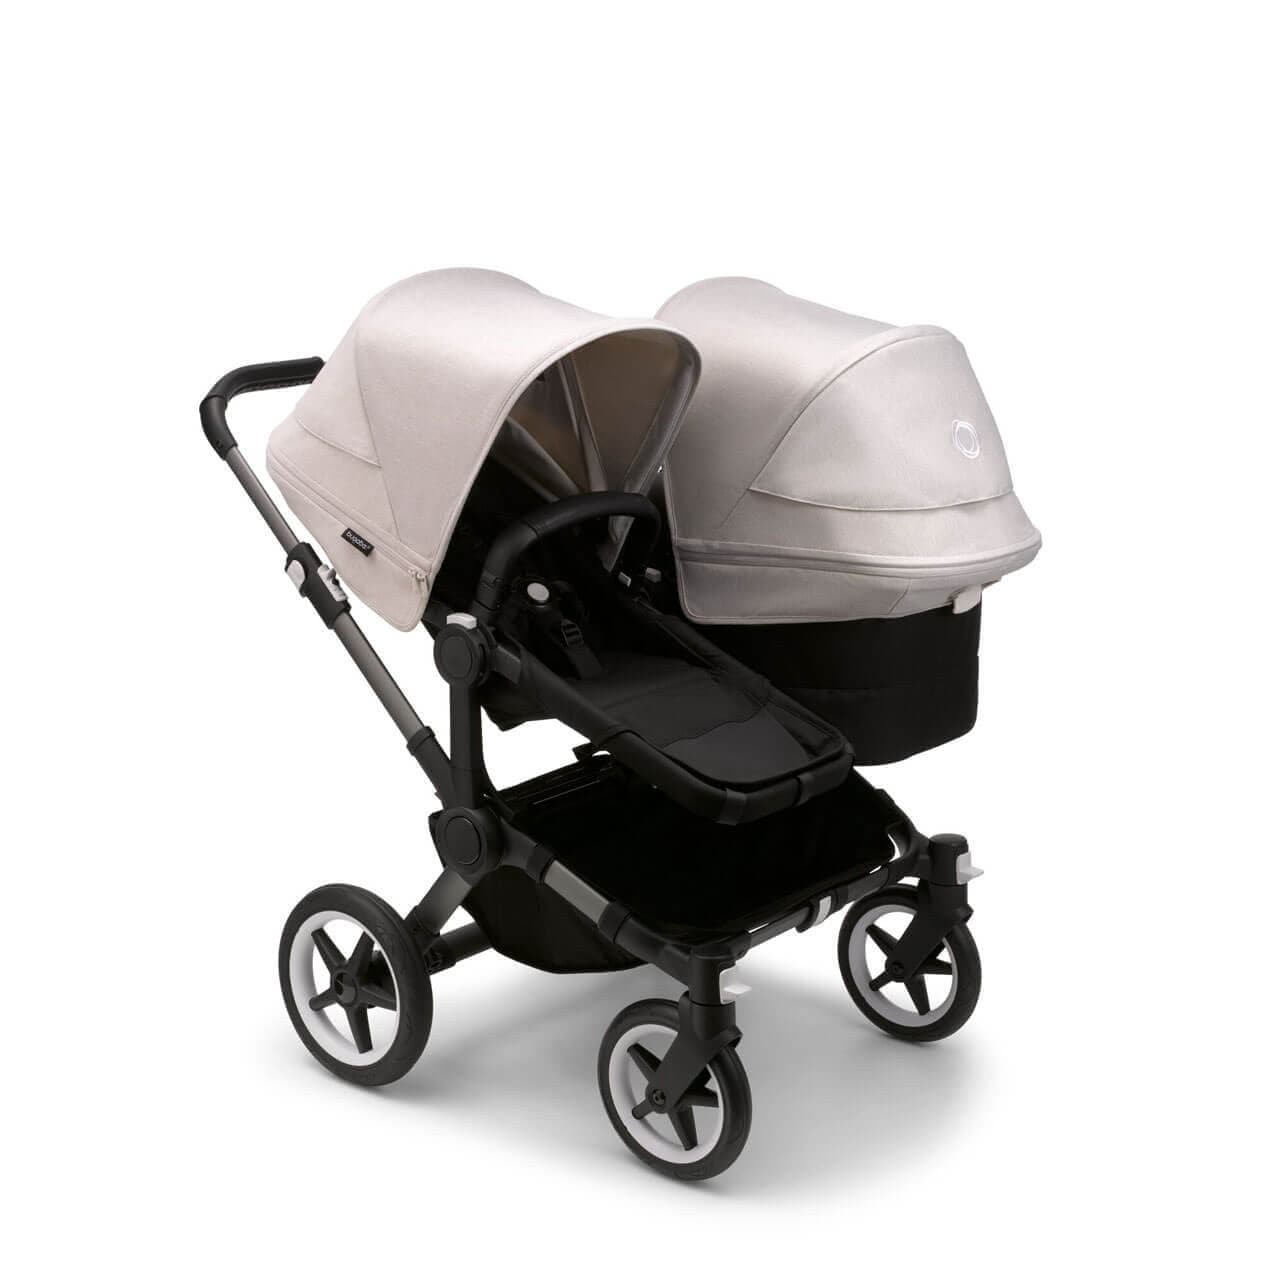 Bugaboo Donkey 5 Duo Pushchair on Graphite/Black Chassis - Choose Your Colour - Misty White | For Your Little One